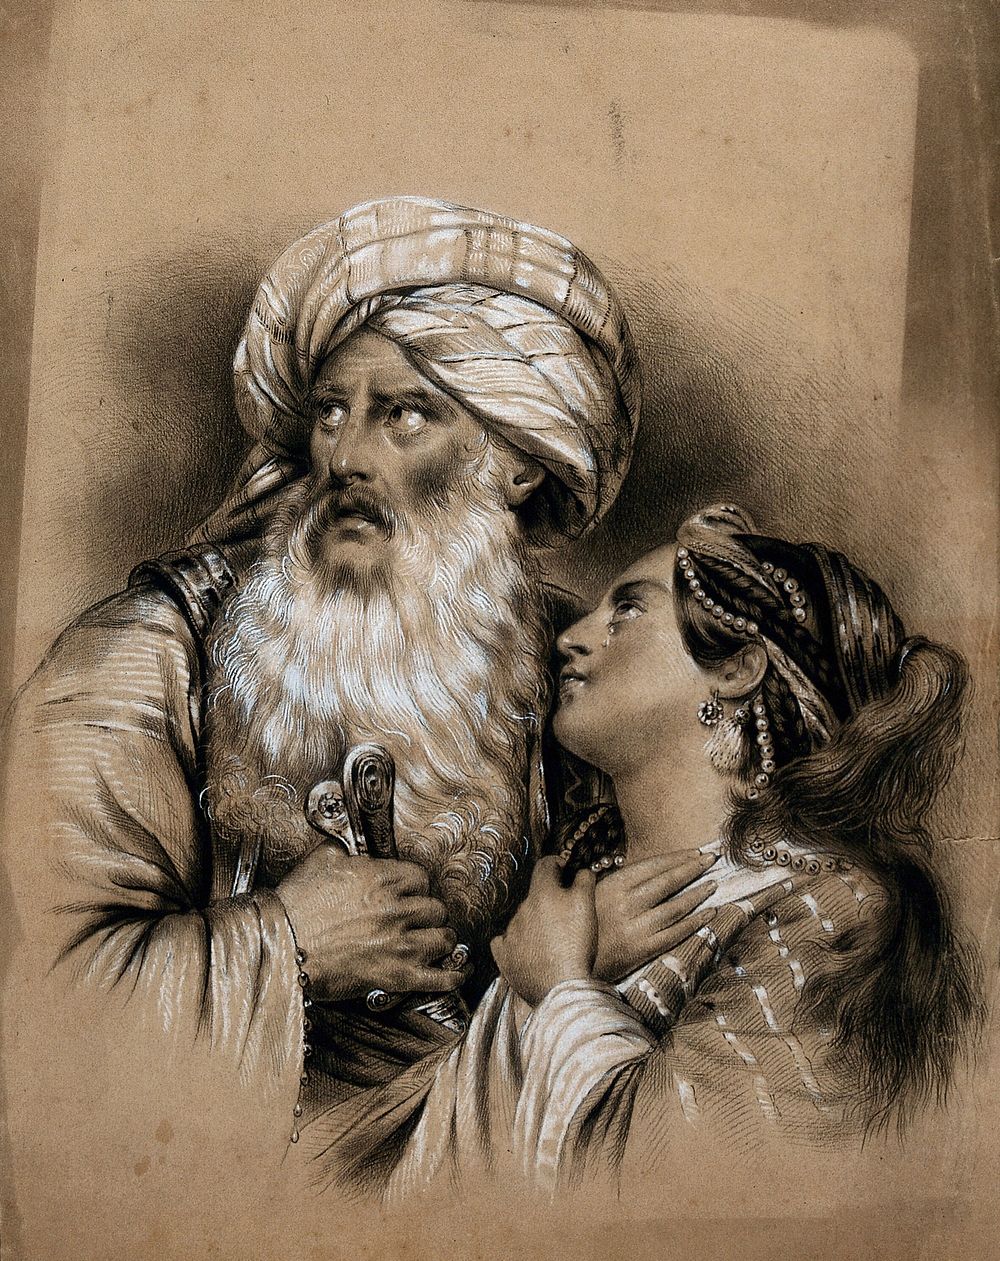 A young tearful woman looking up imploringly at a turbaned man who anxiously looks away. Black chalk drawing.